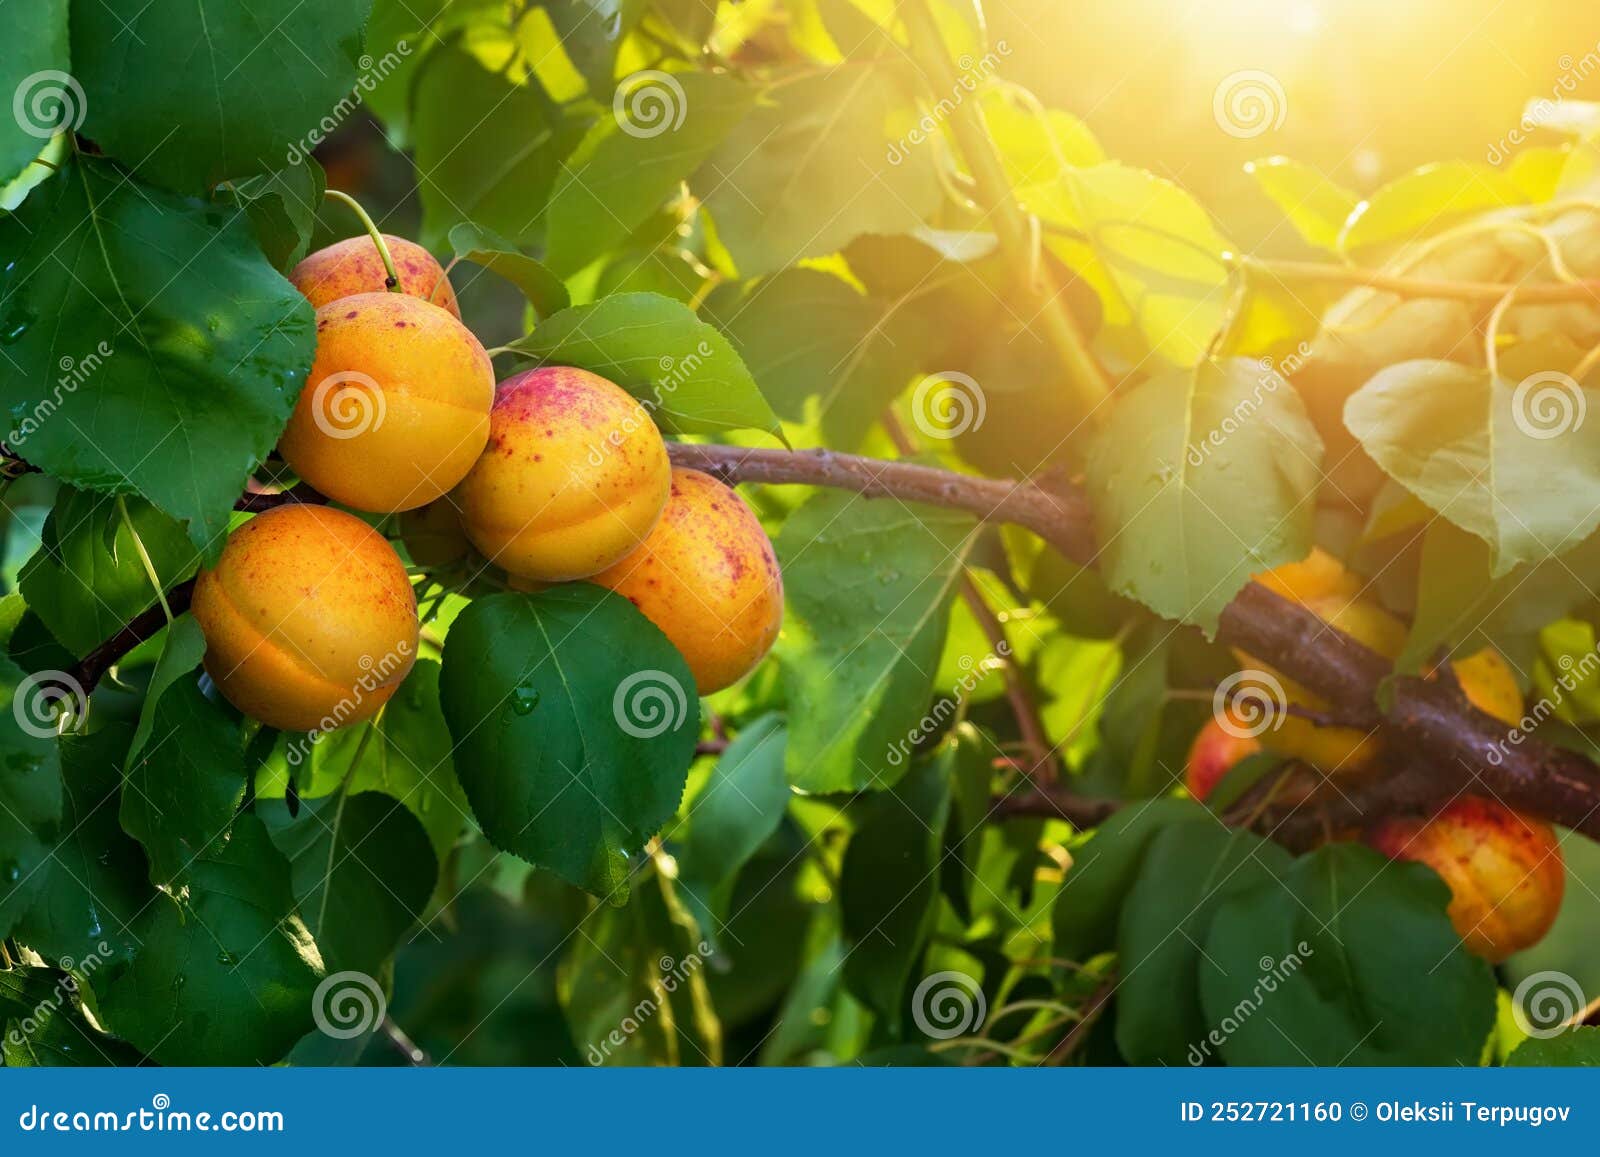 Ripe Apricots Hanging on Branch in Garden Stock Photo - Image of ...